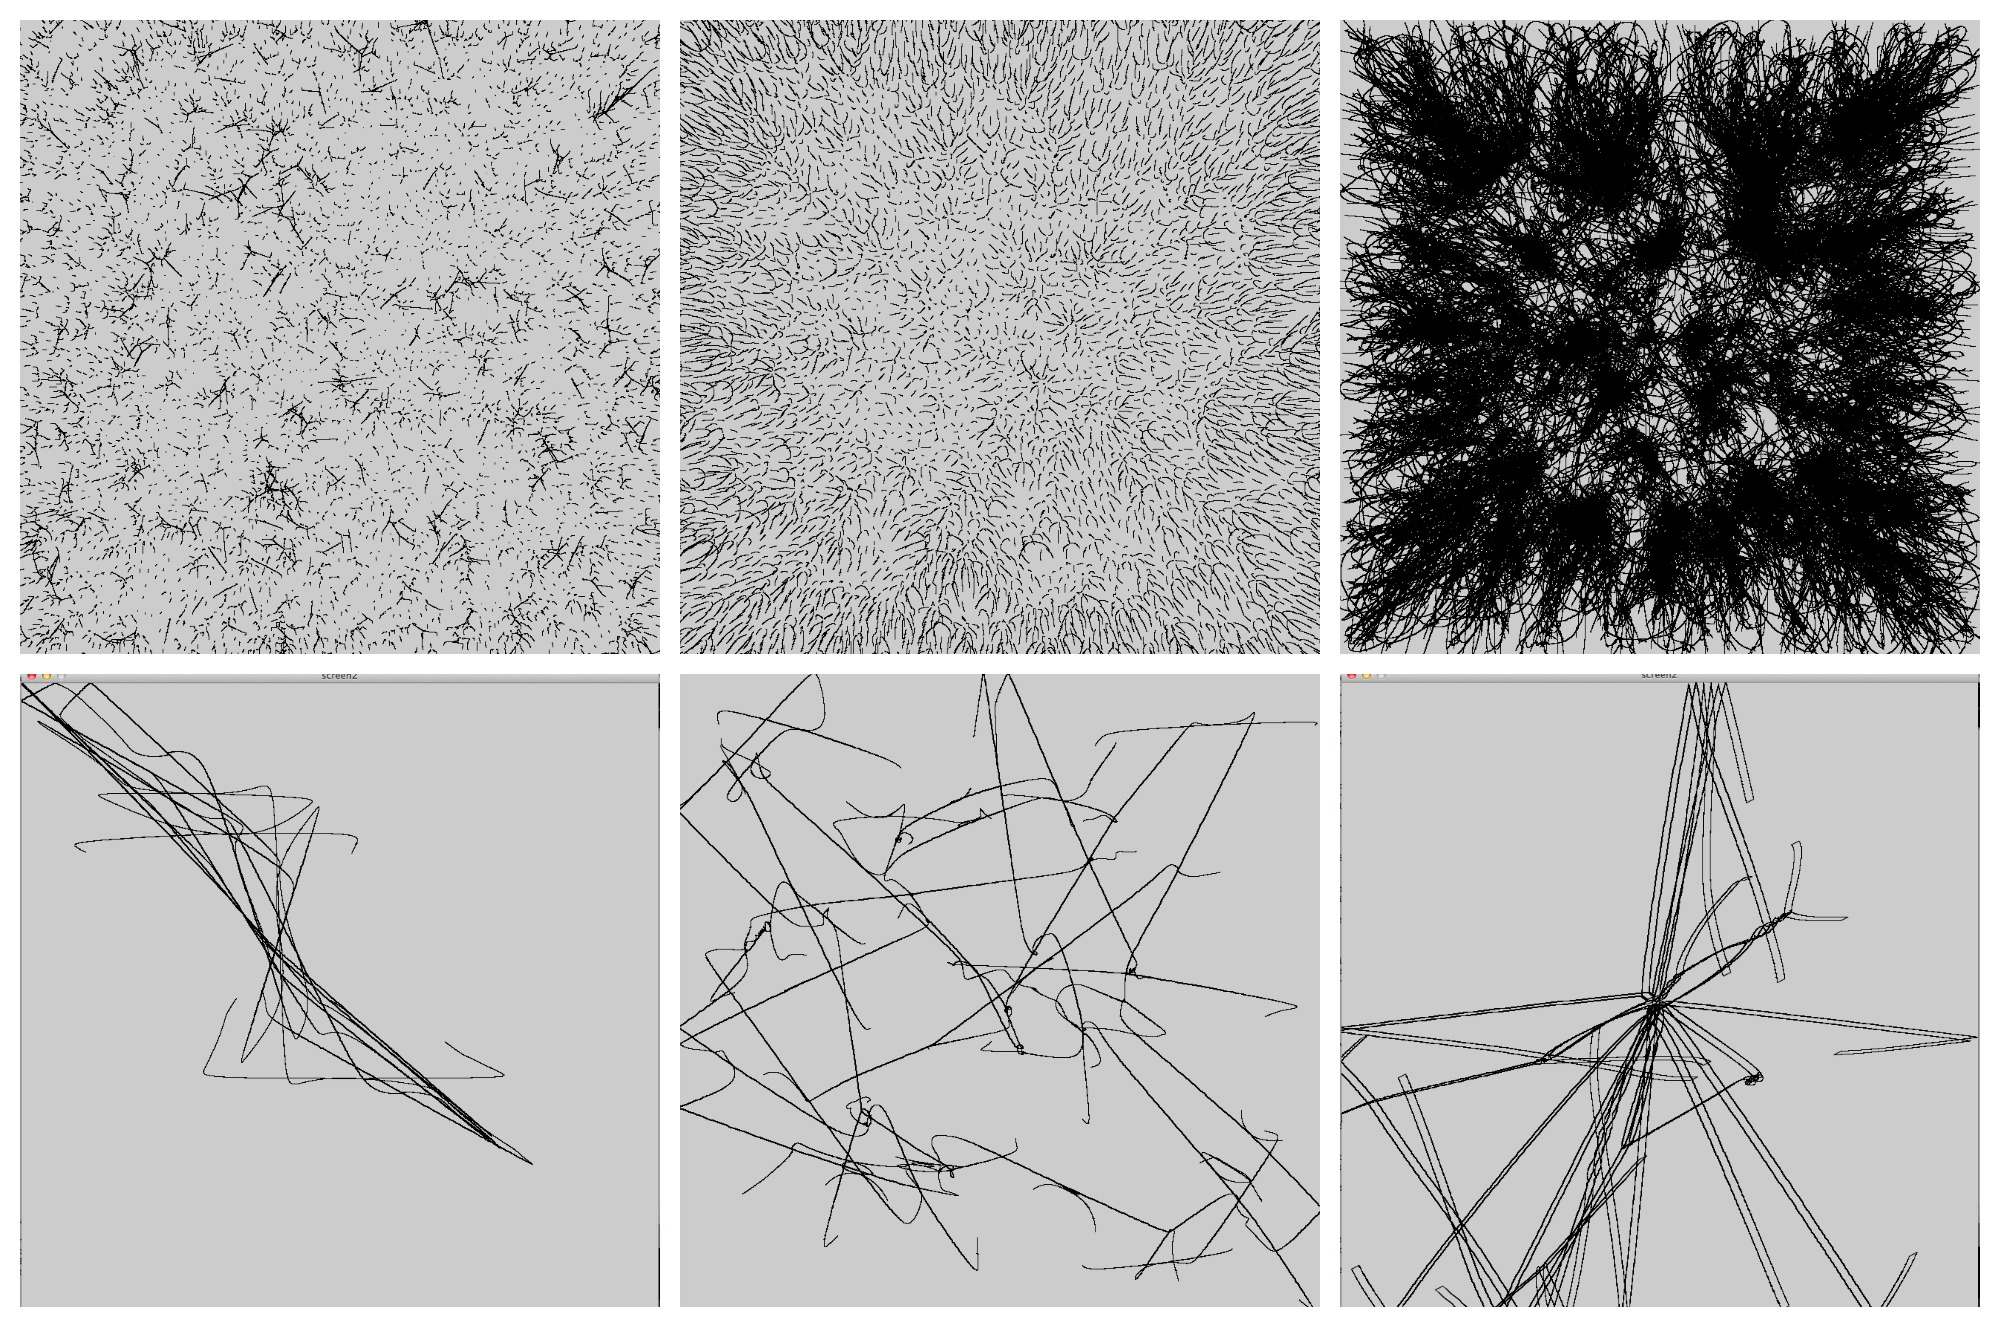 Things that happened while I played with the constants in my particle simulations.